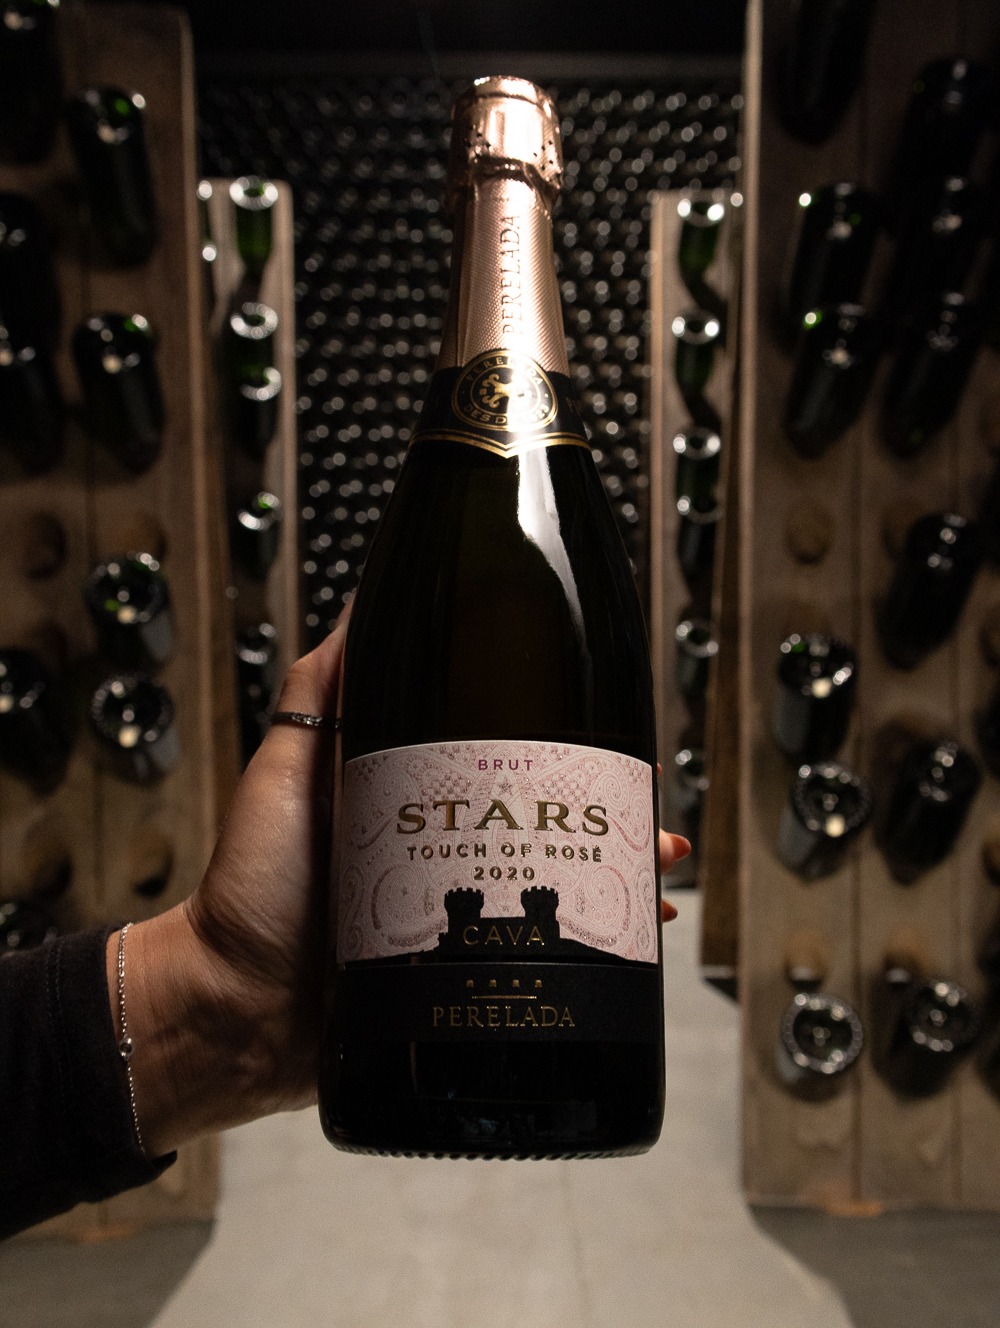 Perelada Cava Stars Touch of Rosé Brut 2020																	Bone-dry, wickedly flavorful Brut rosé that’ll leave you counting STARS! Over 50% off!